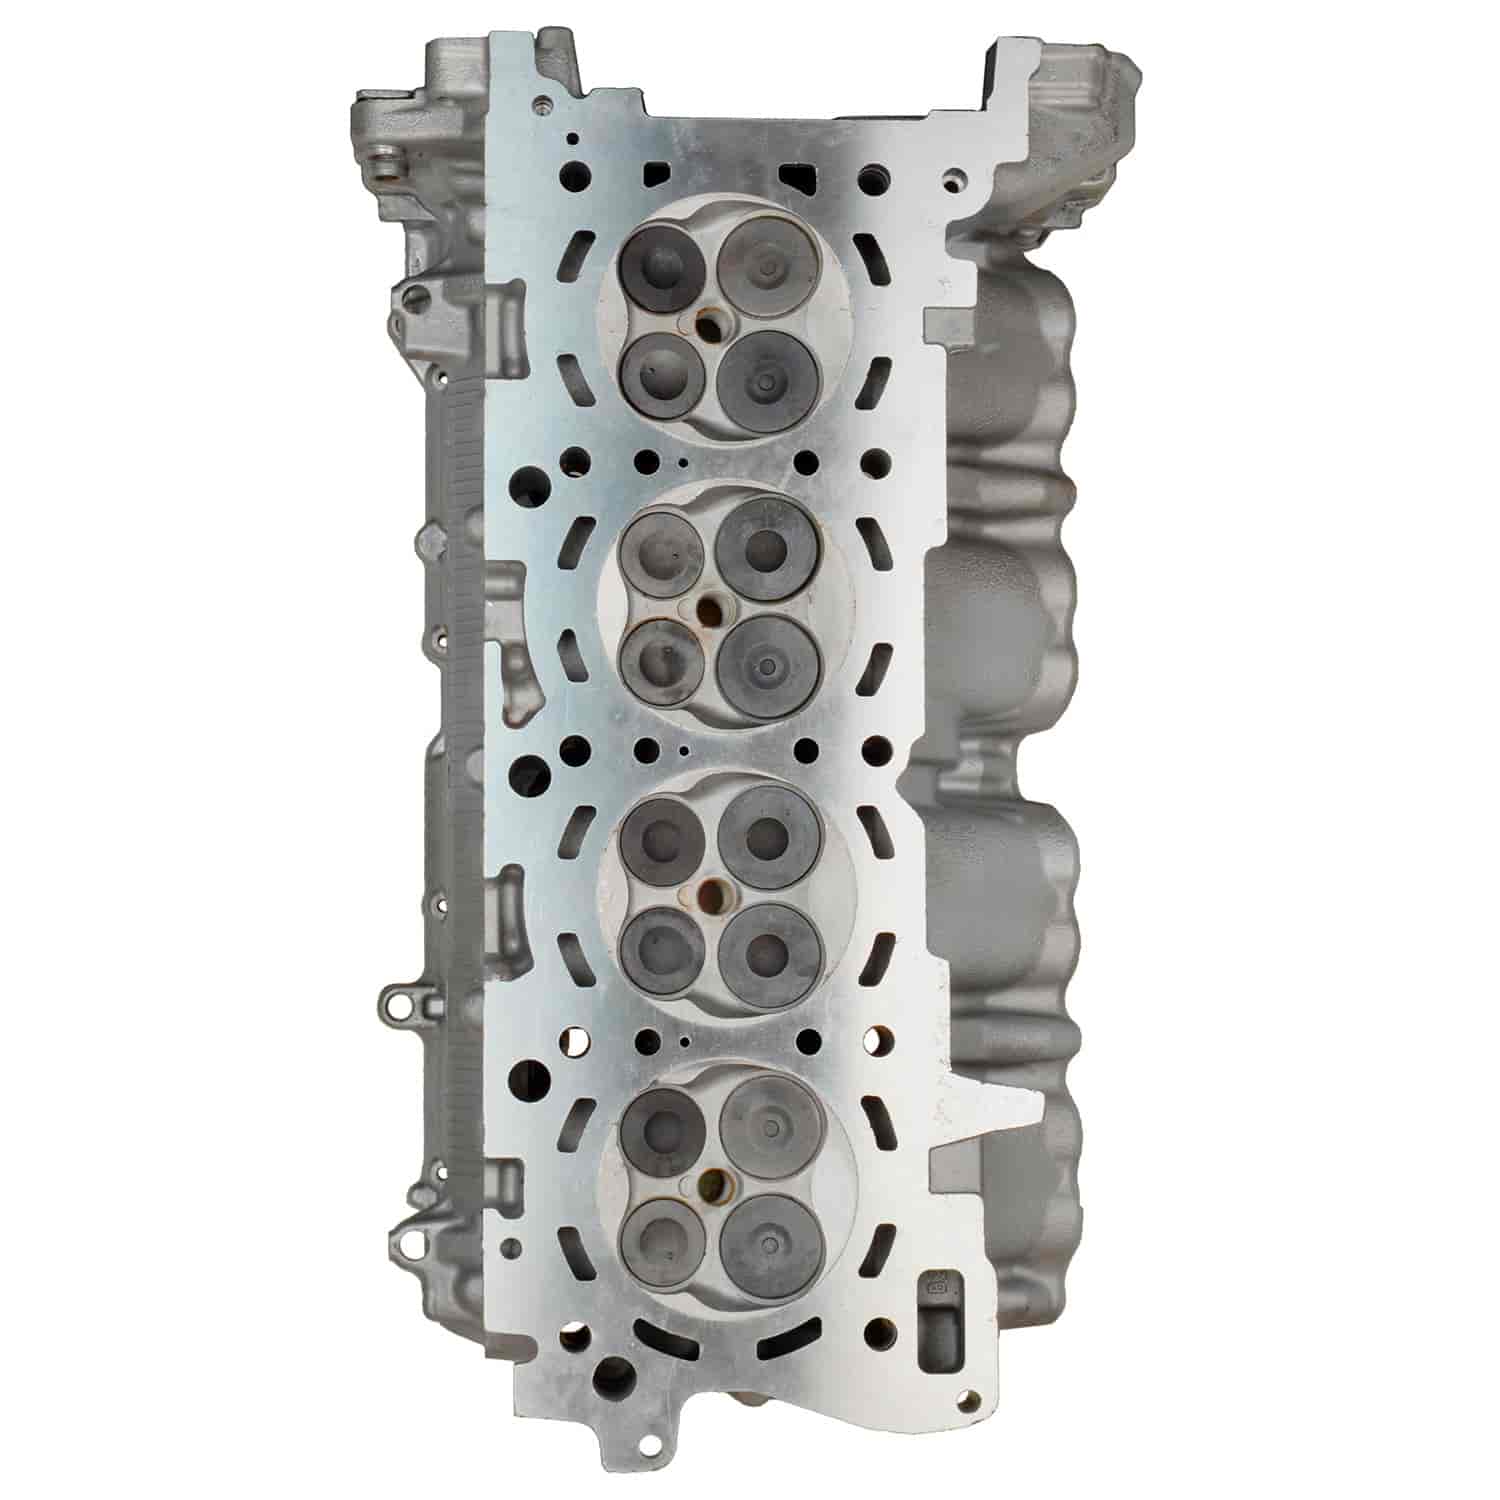 Remanufactured Cylinder Head for 2007-2015 Toyota/Lexus with 5.7L